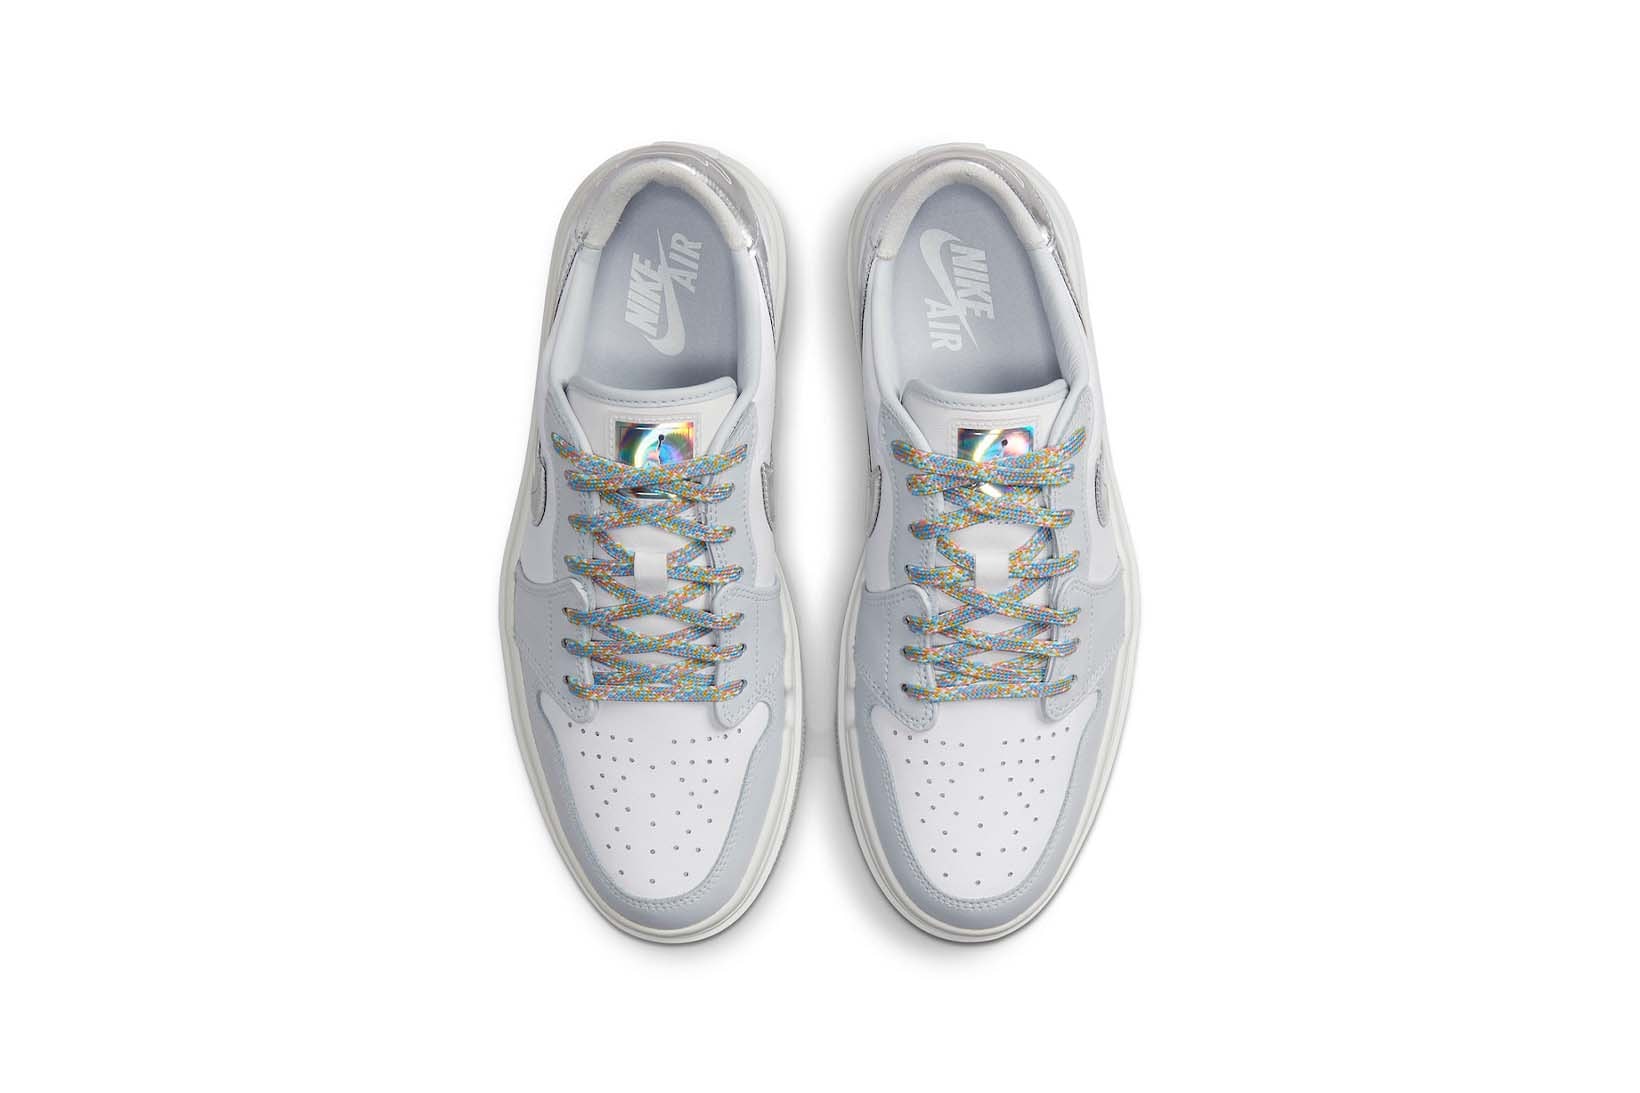 Jordan 1 Low Elevated Low LV8D Grey White DX6069-101 Price Release Info